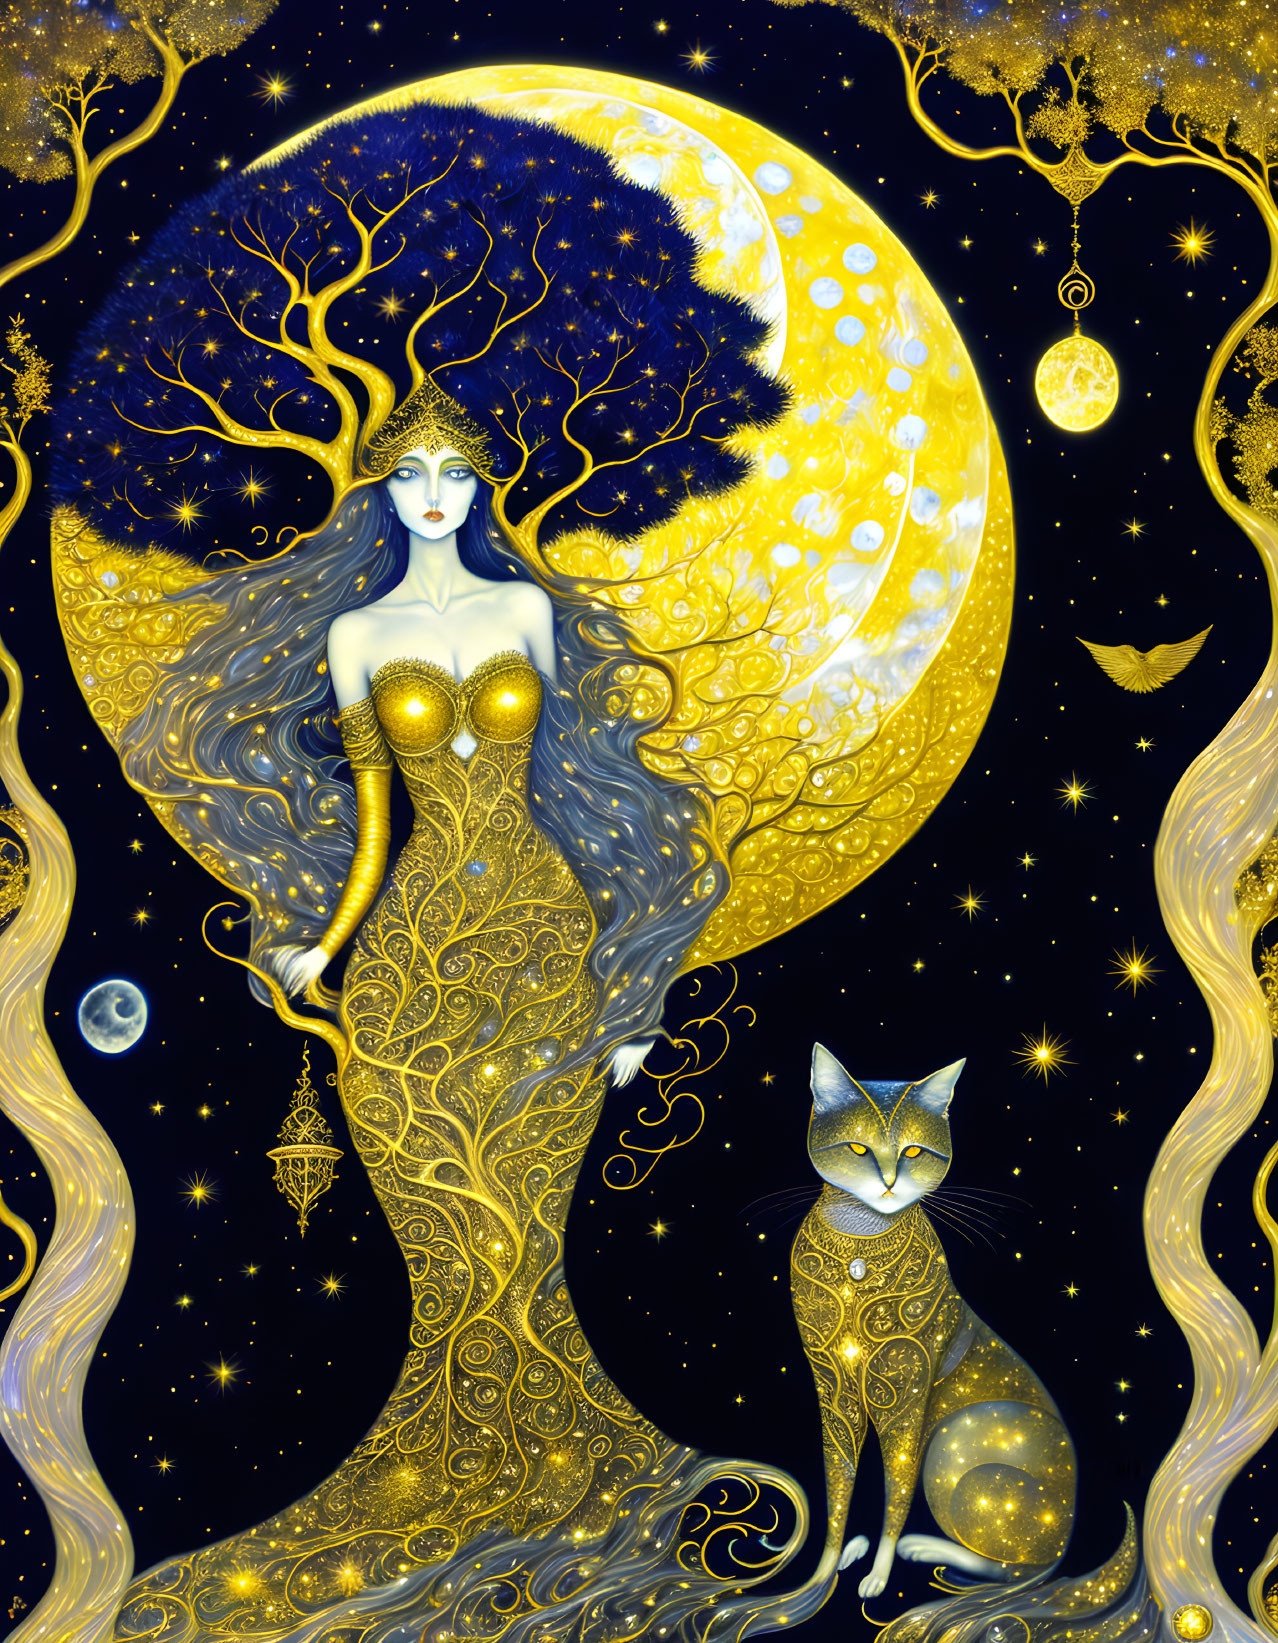 Fantastical woman merging with crescent moon and stylized cat in golden patterns